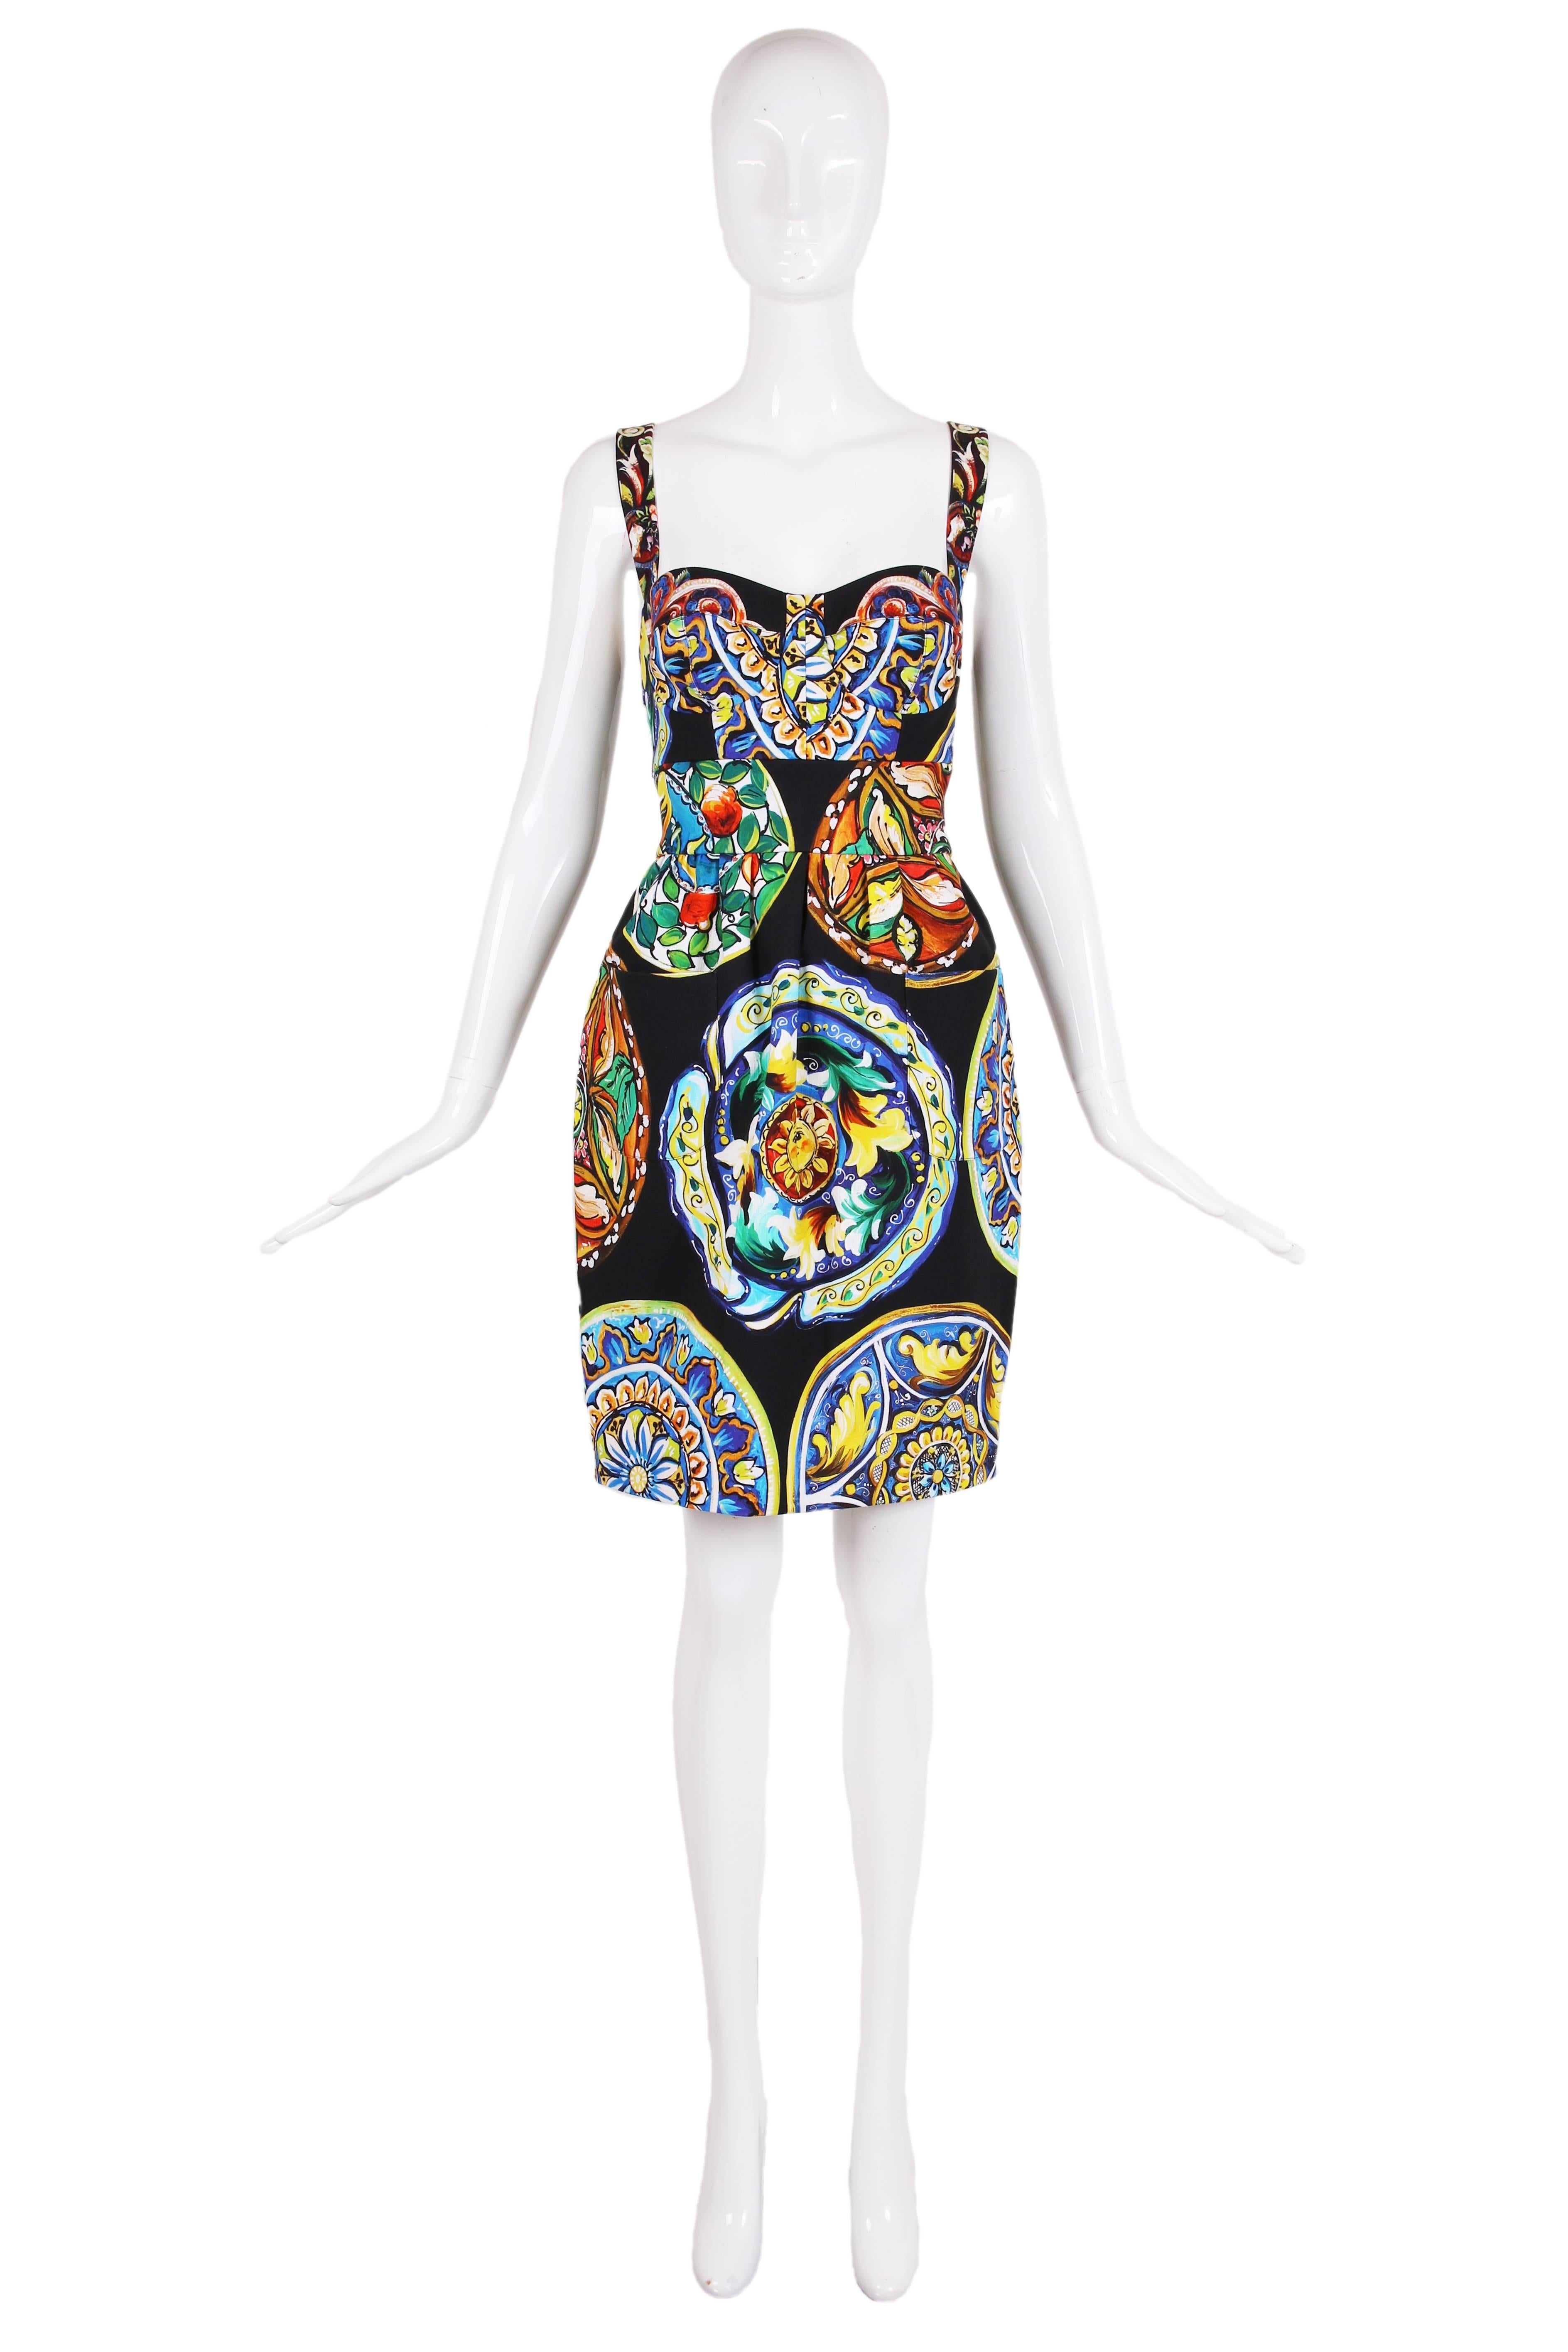 2013 Dolce & Gabbana cotton printed bustier dress - new with tags. Size IT44.
MEASUREMENTS:
Bust - 36